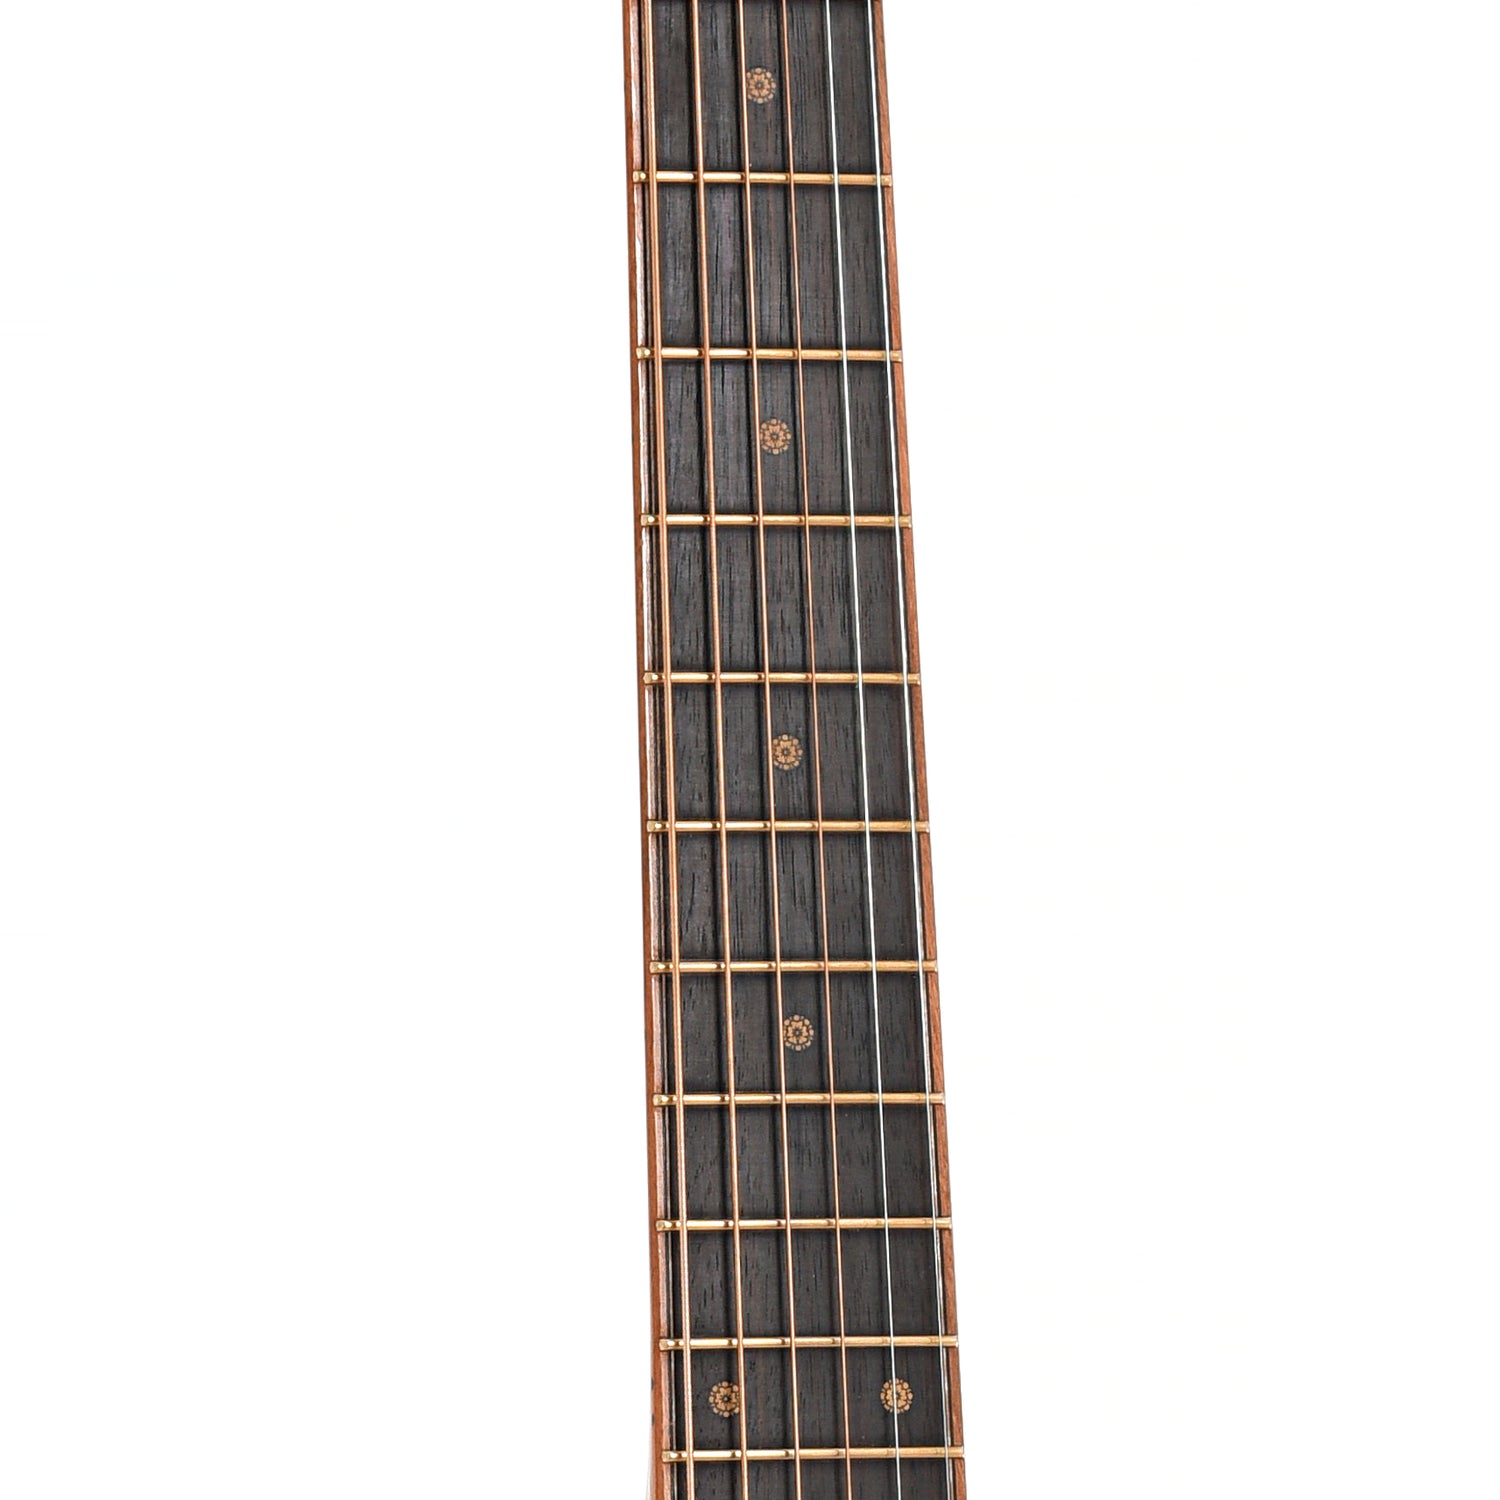 Fretboard of Petros Tunnel 13 GC Acoustic